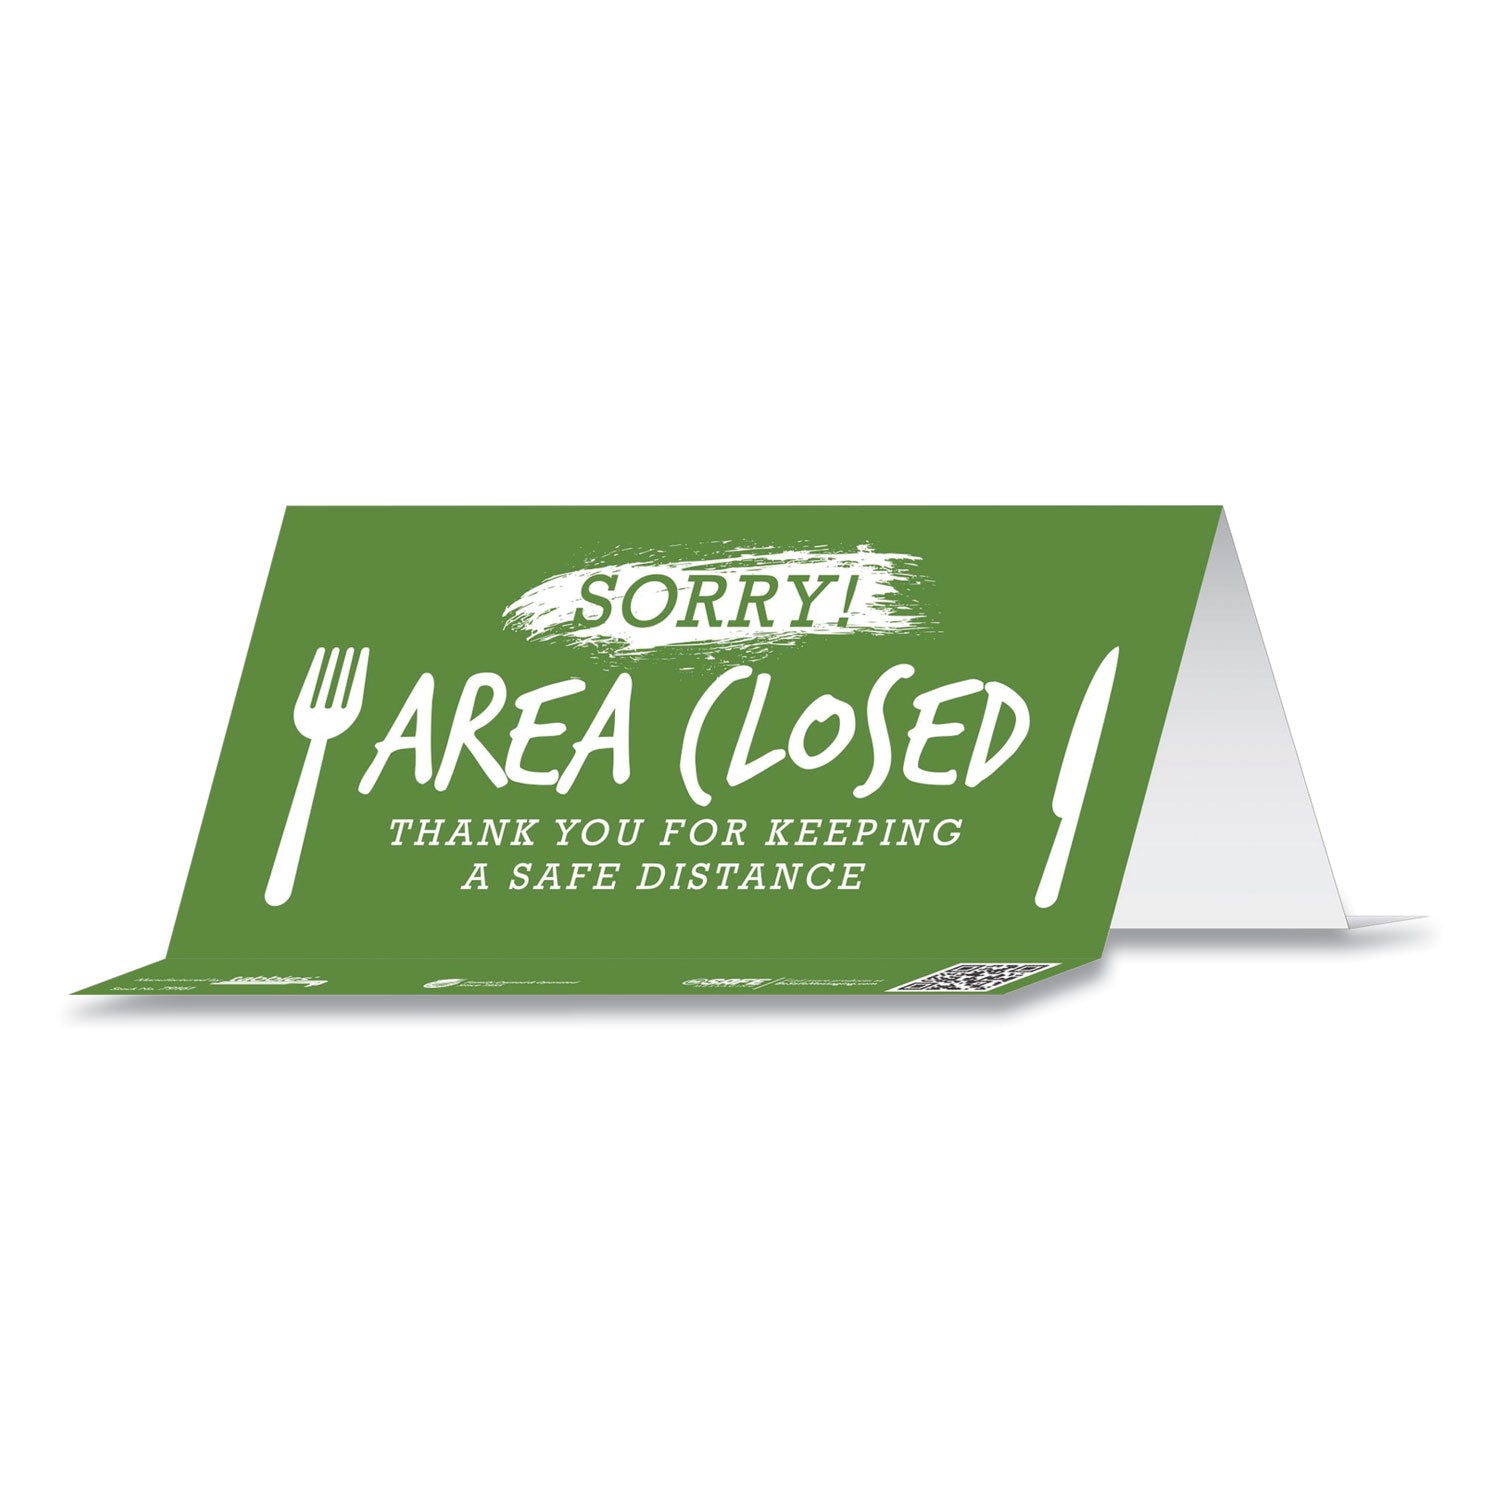 besafe-messaging-table-top-tent-card-8-x-387-sorry!-area-closed-thank-you-for-keeping-a-safe-distance-green-10-pack_tab79062 - 2